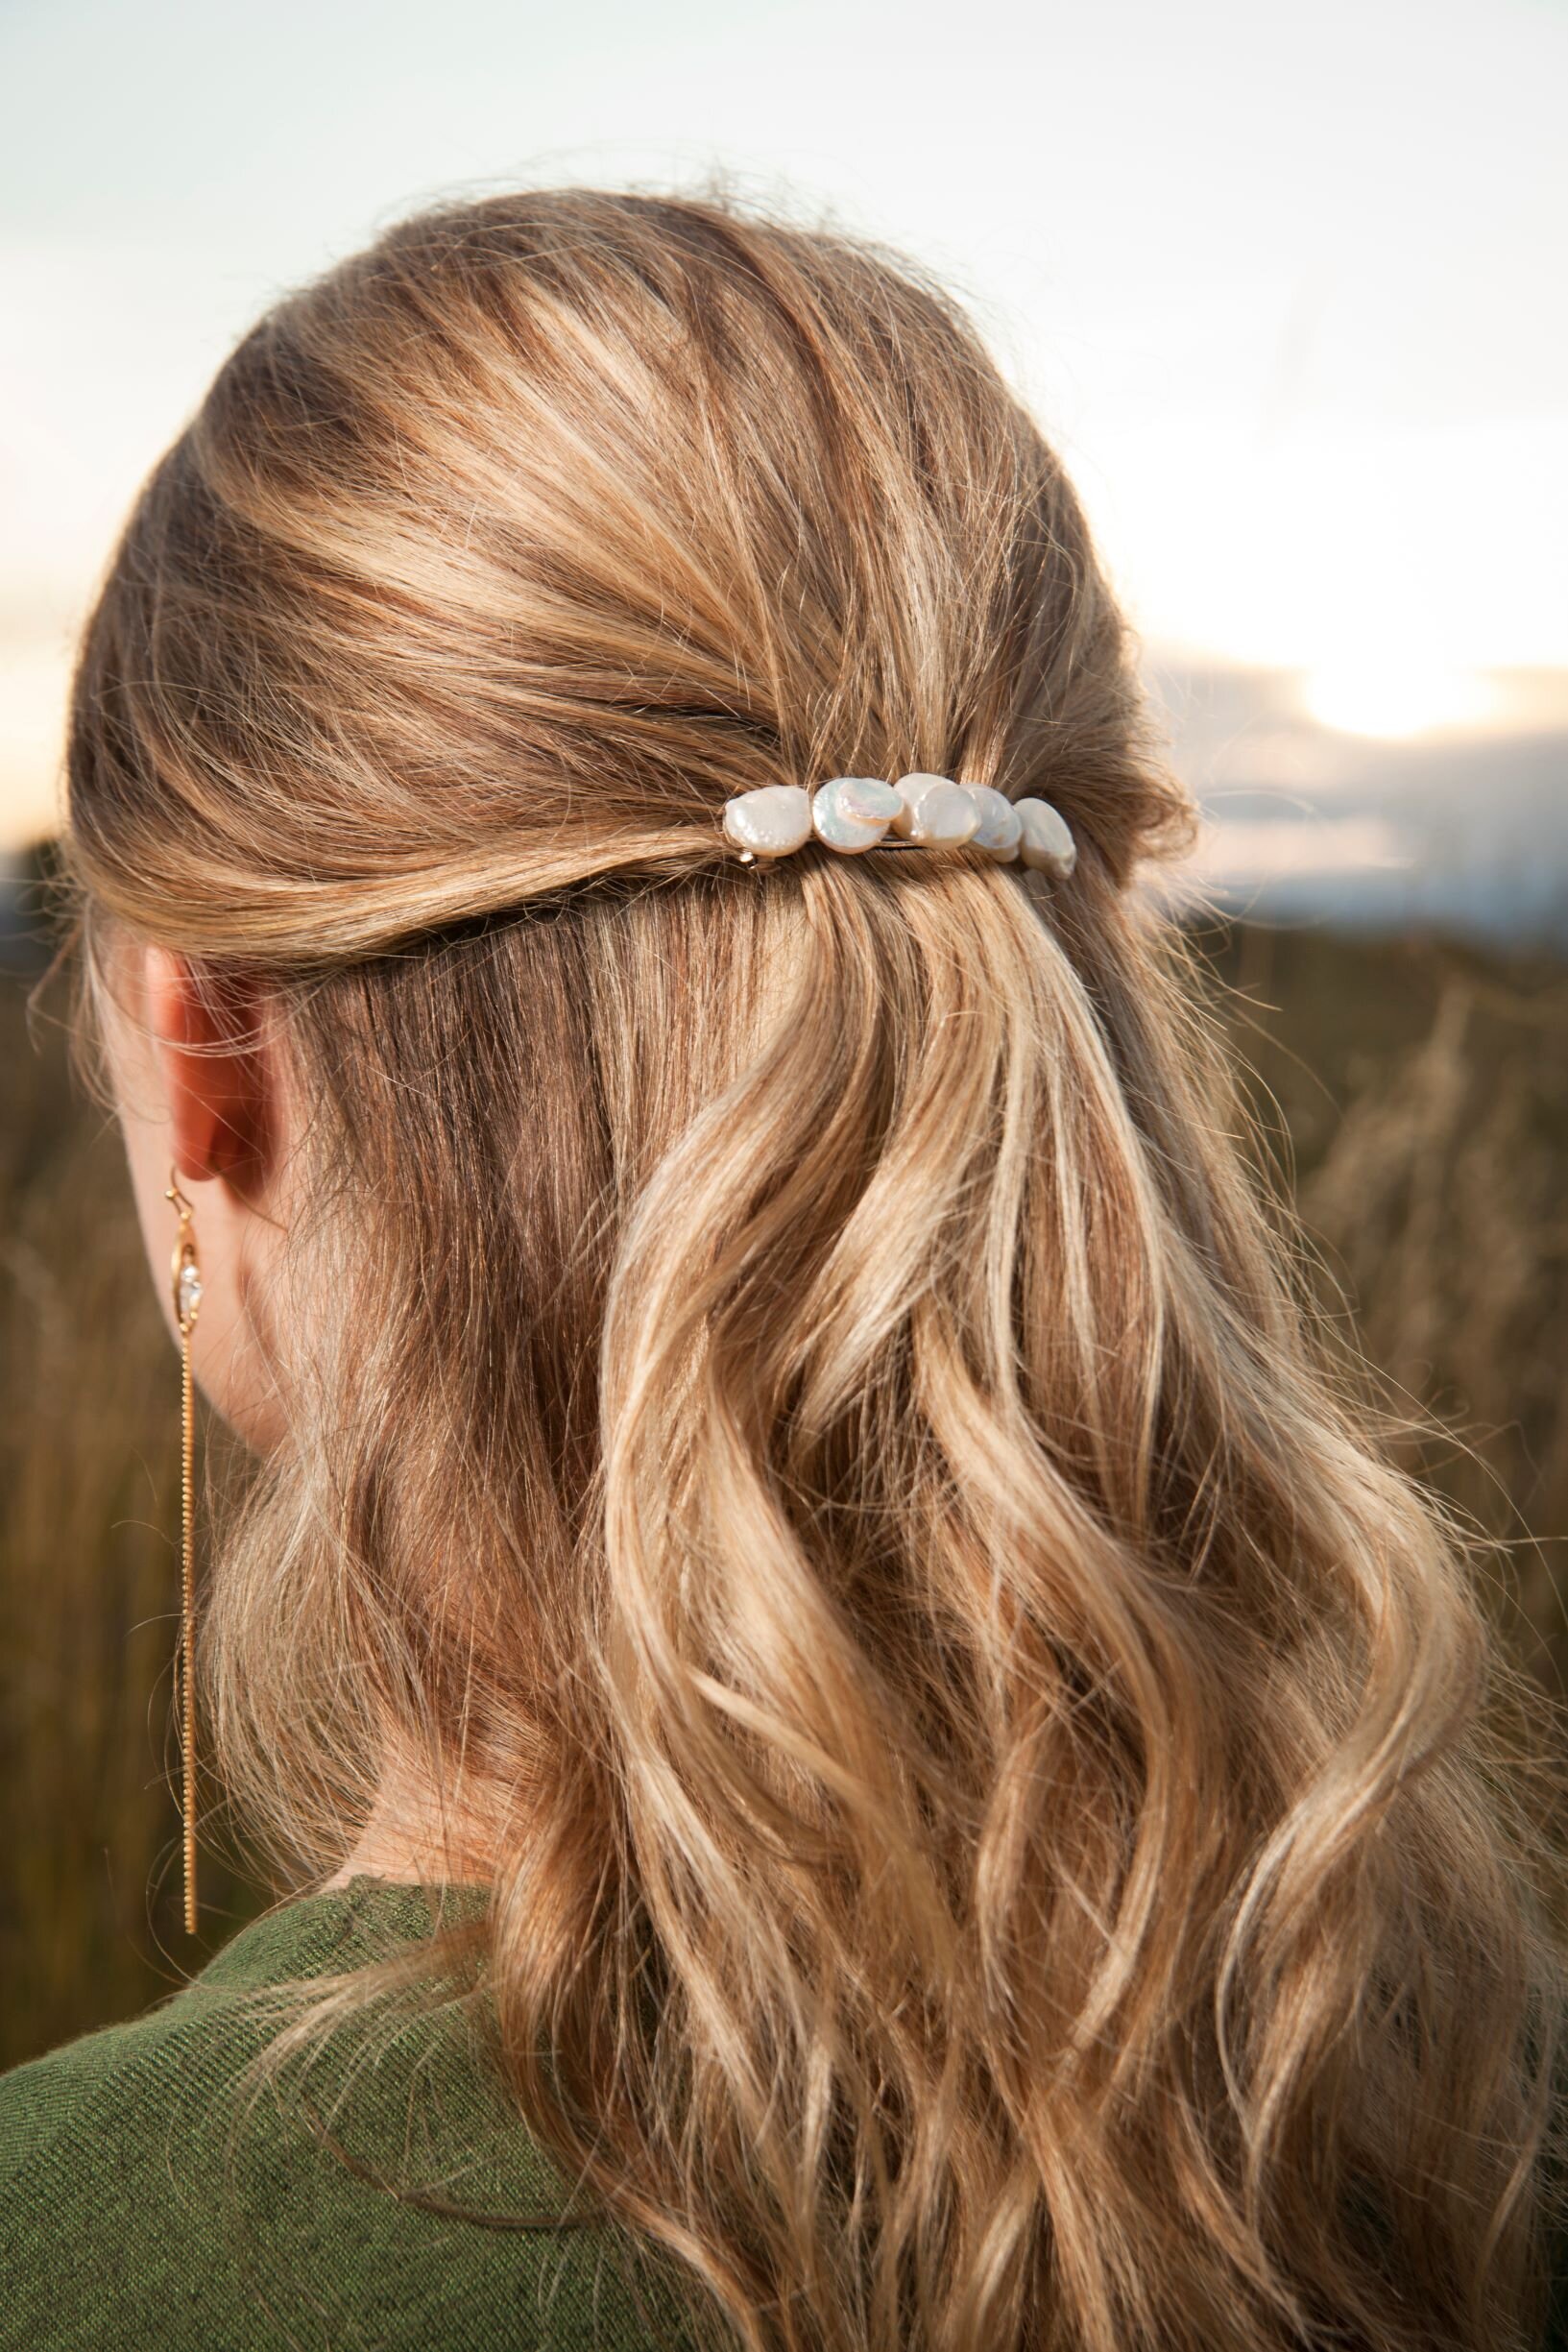 Hair Clips and Fashion Accessories for Women